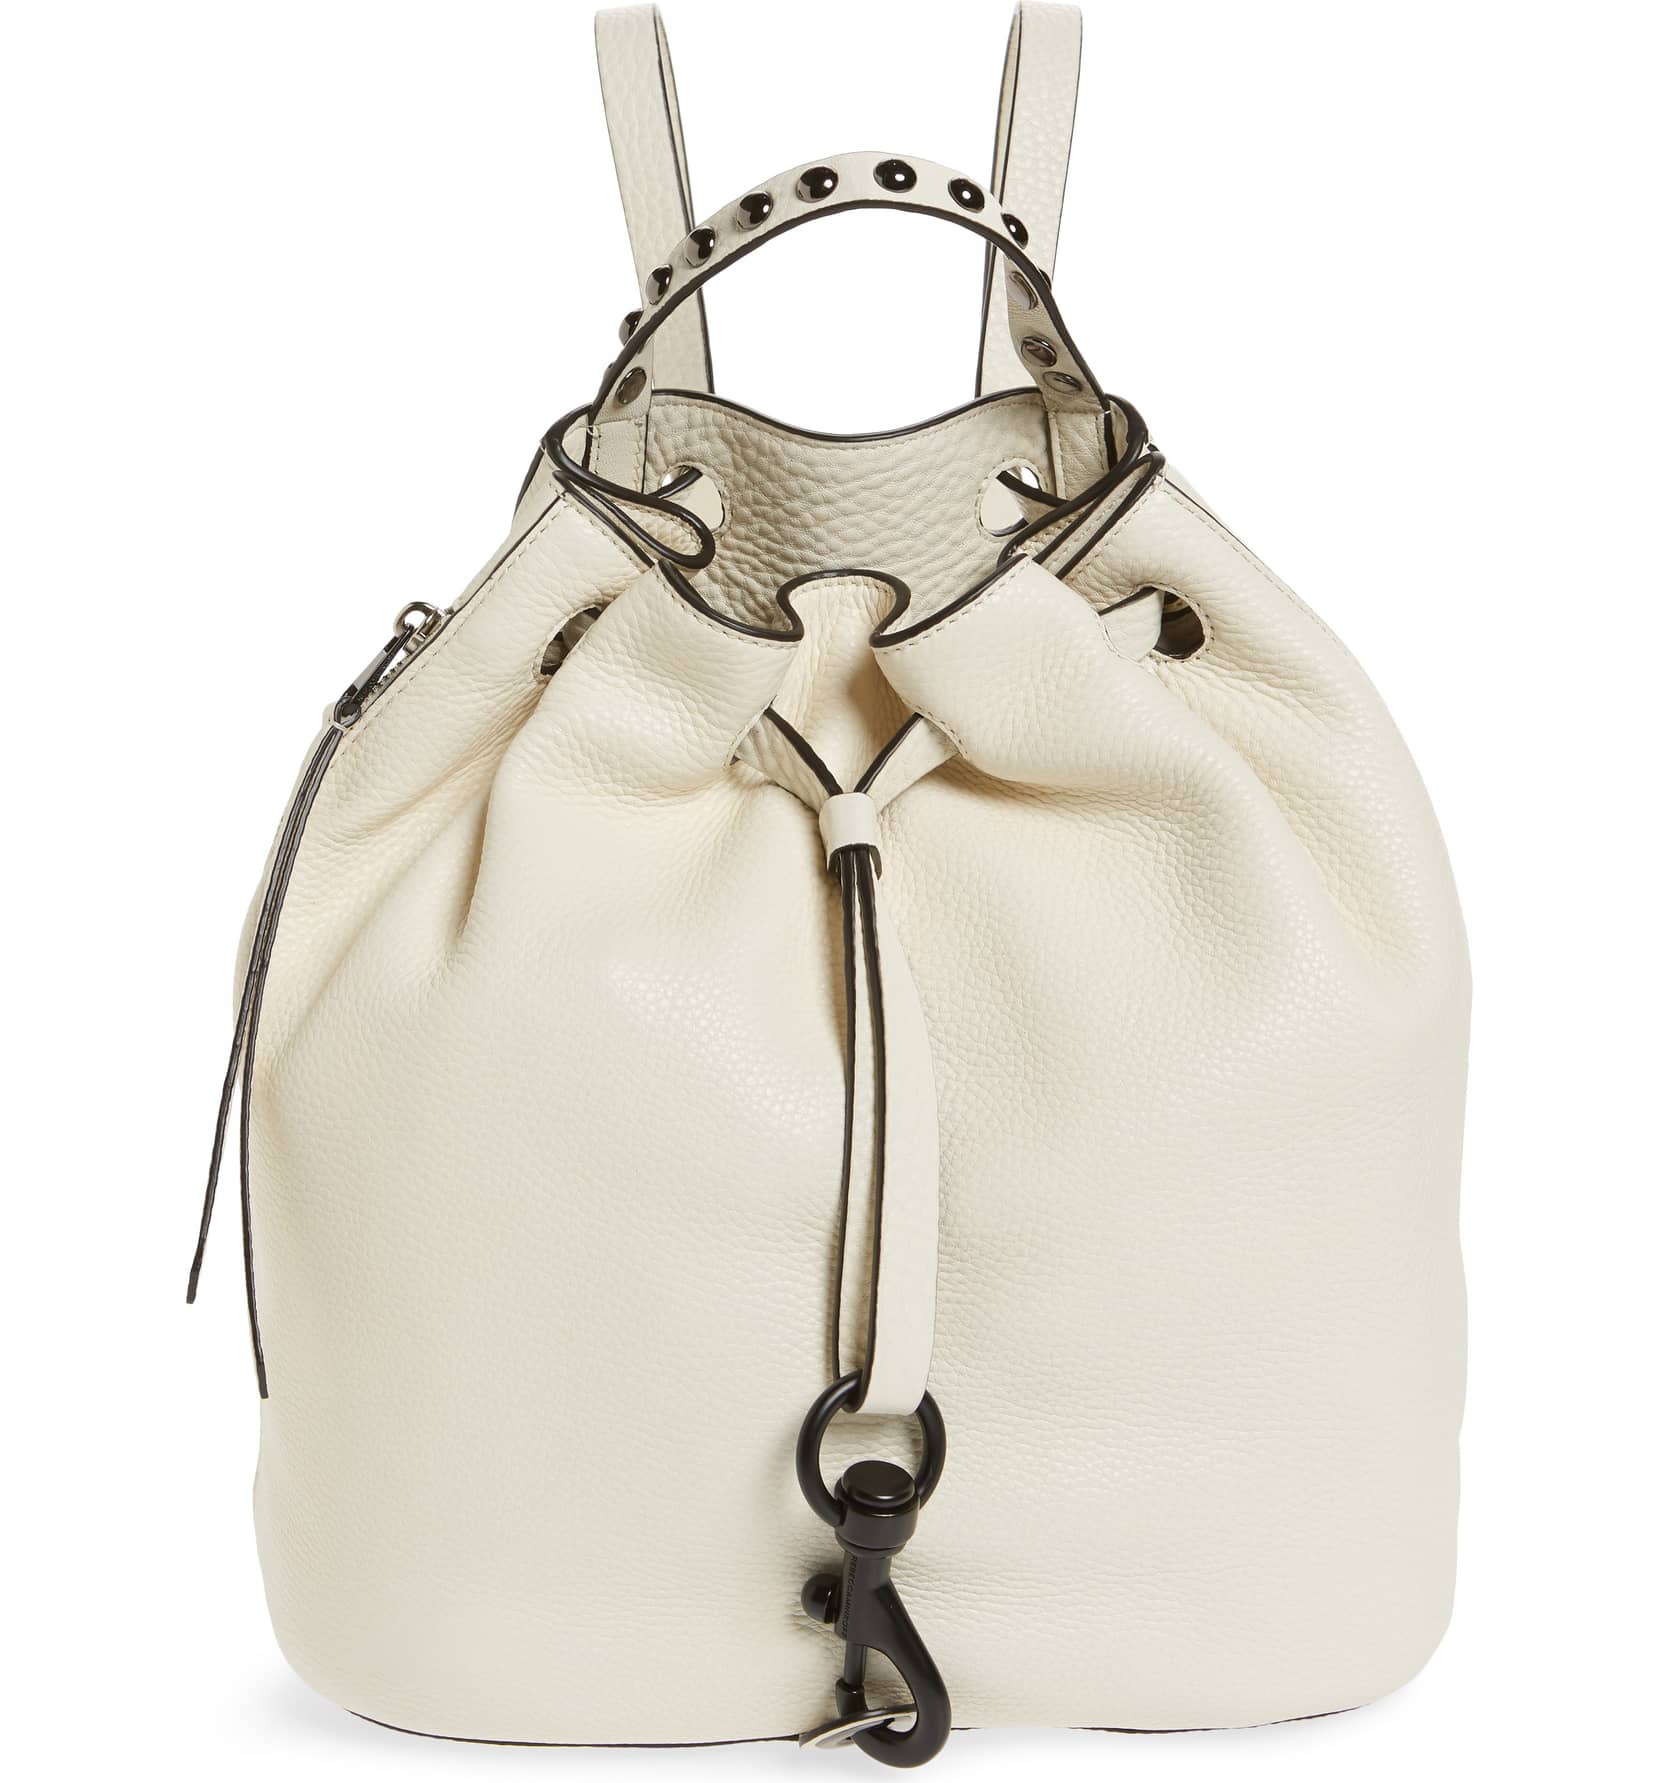 Shop This Leather Rebecca Minkoff Backpack on Sale at Nordstrom